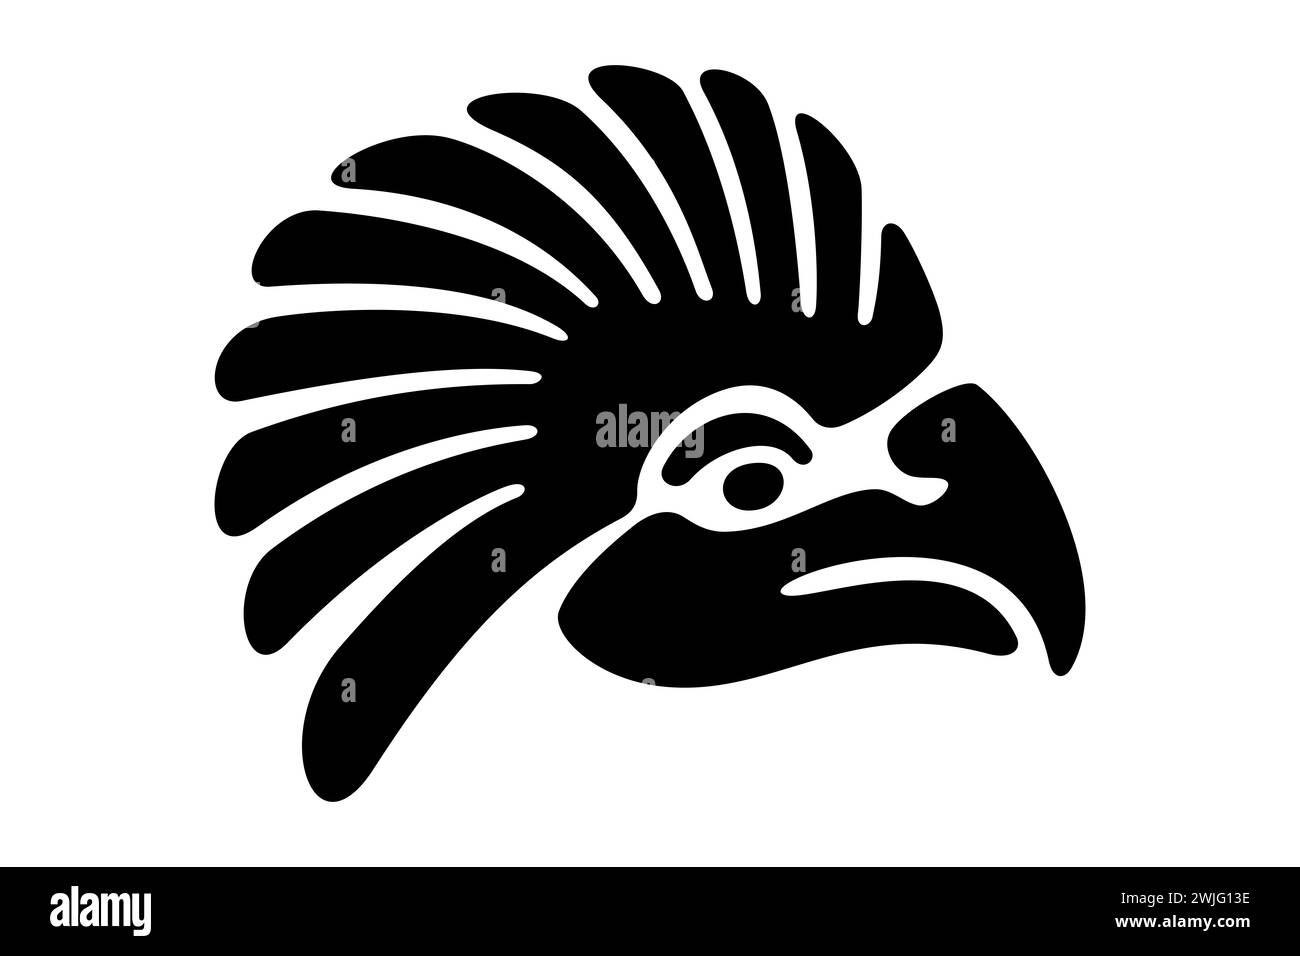 Eagle head symbol of ancient Mexico. Decorative Aztec clay stamp motif, showing the head of a golden eagle, as it was found in Tenochtitlan. Stock Photo